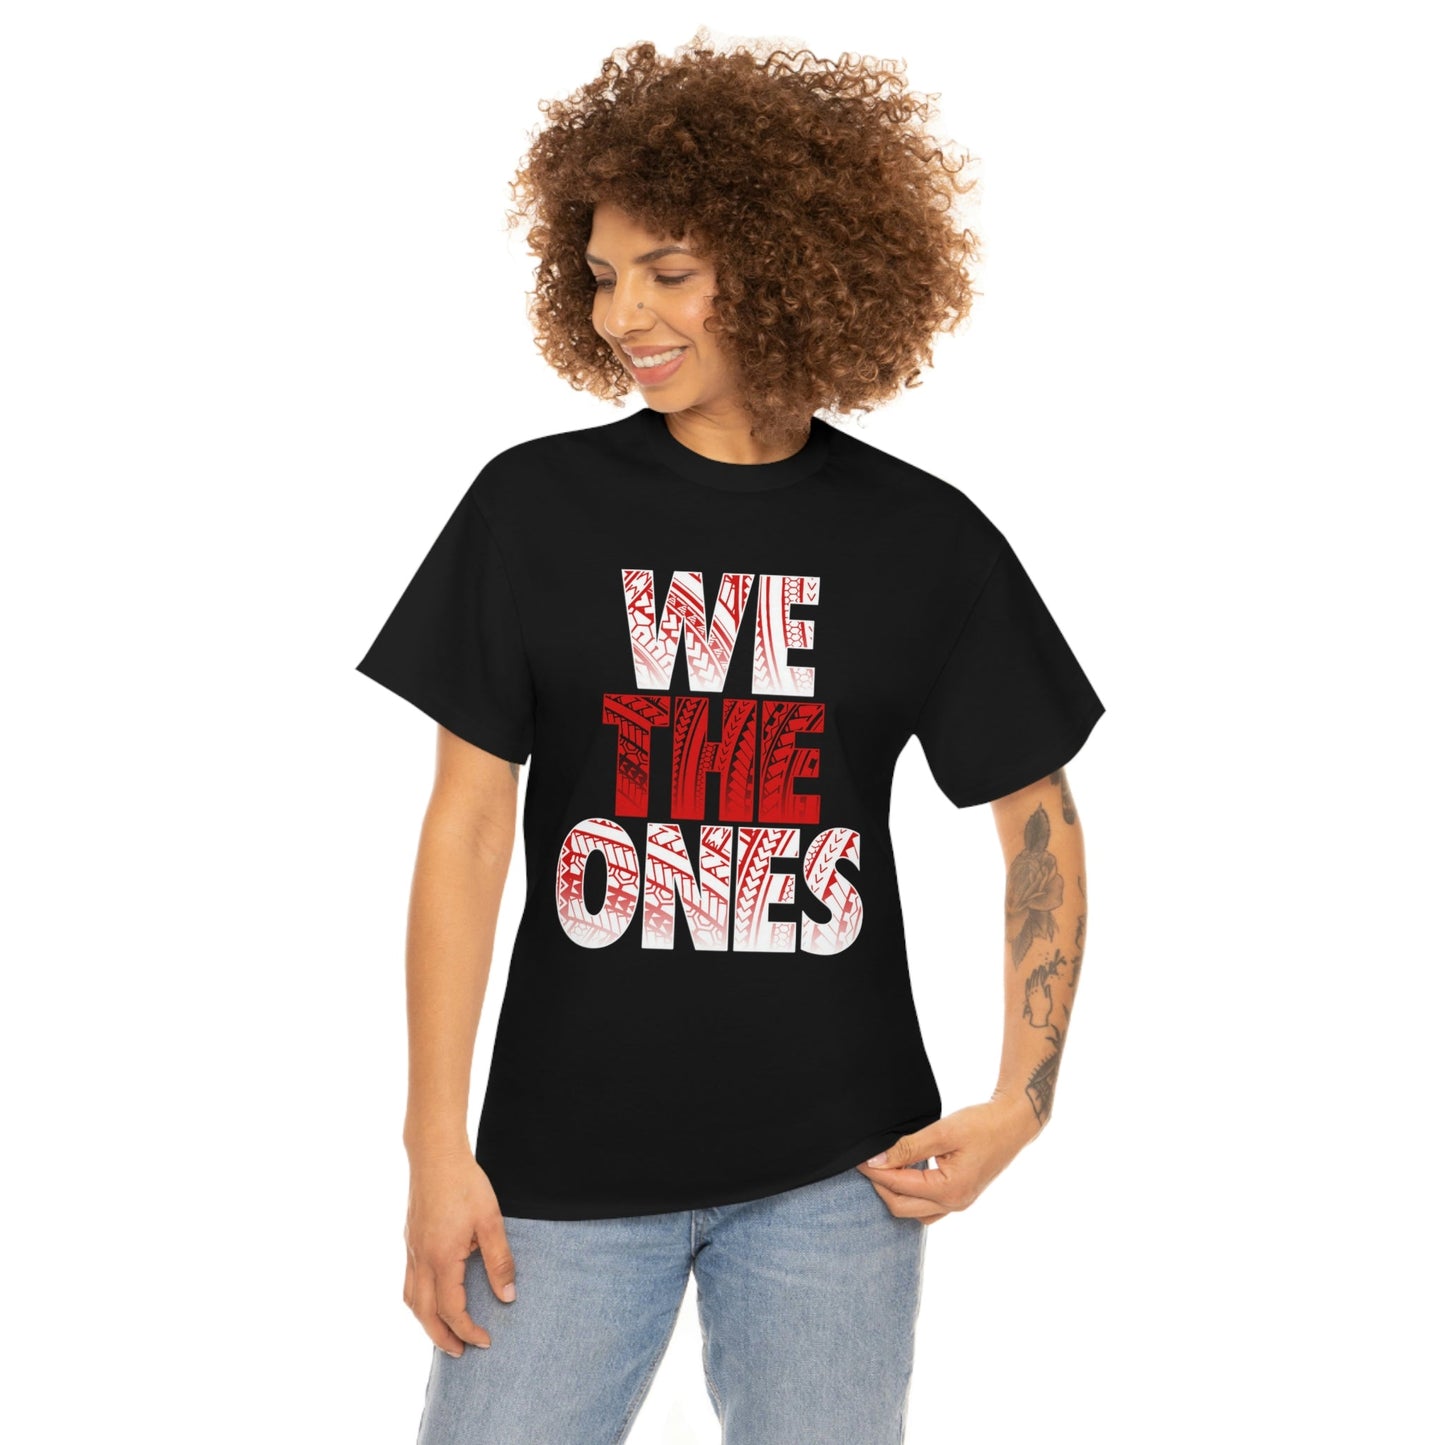 The Bloodline We The Ones Tribal T-Shirt - Black - RetroTeeShop